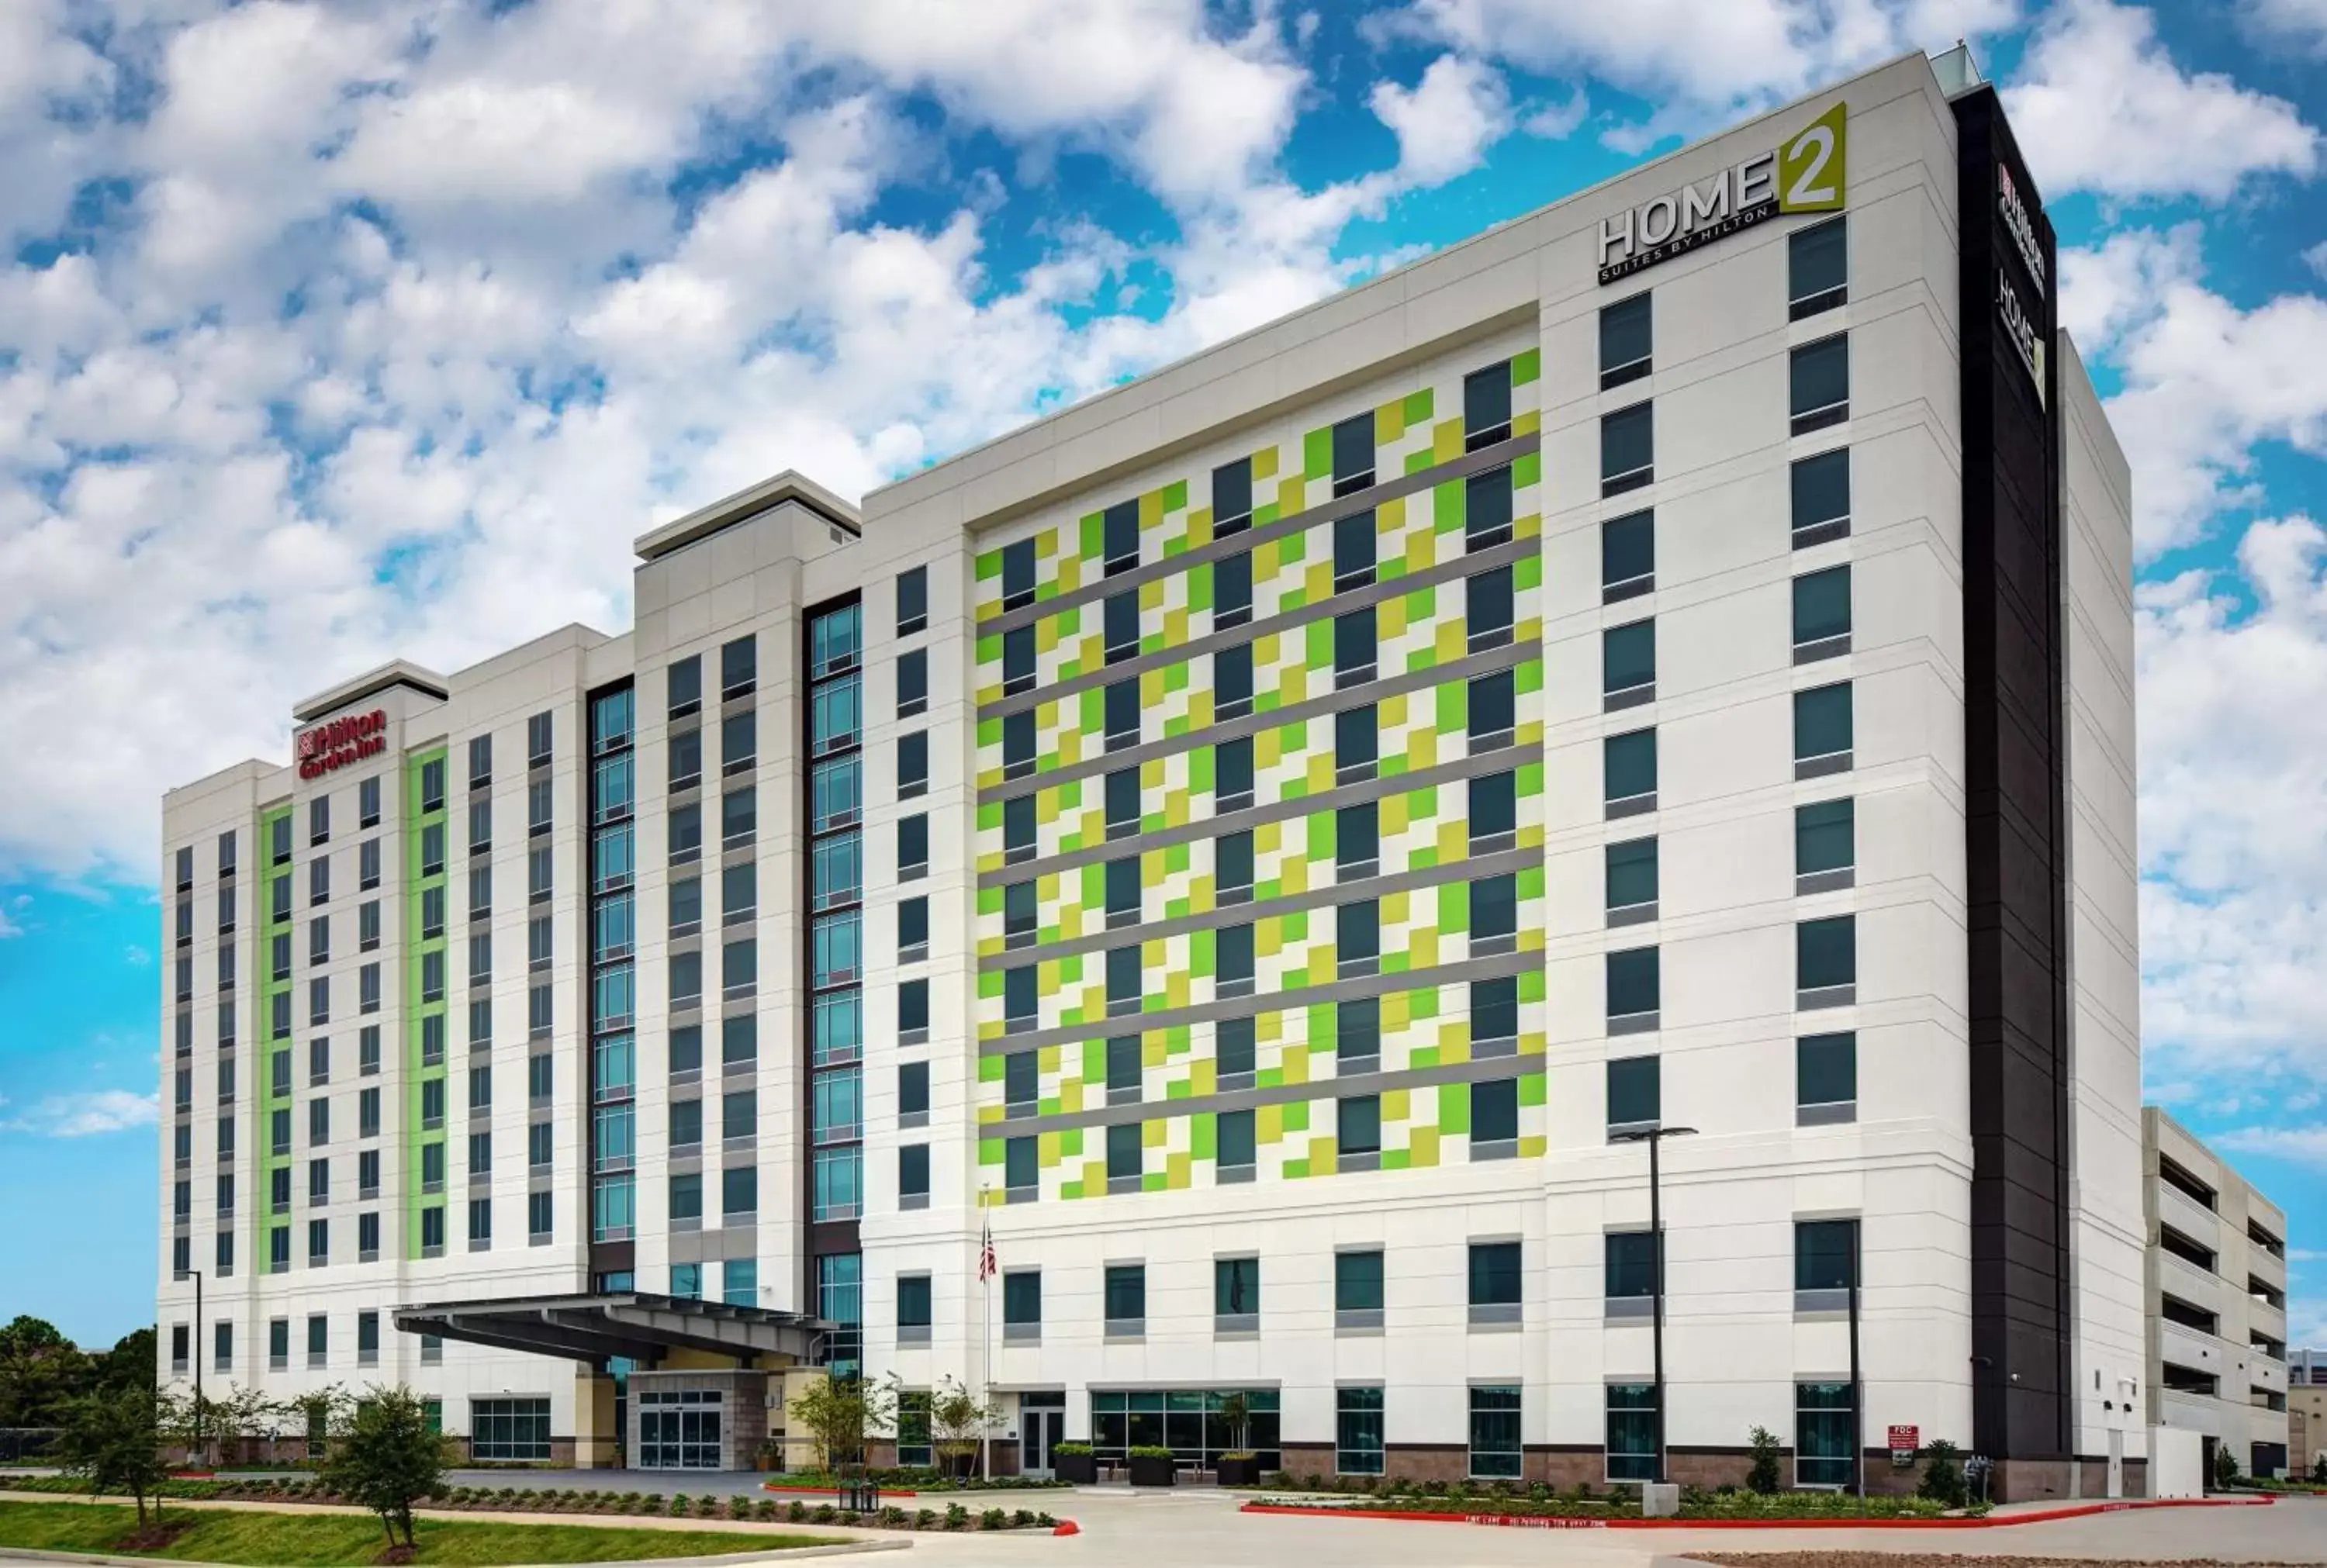 Property Building in Home2 Suites by Hilton Houston Medical Center, TX